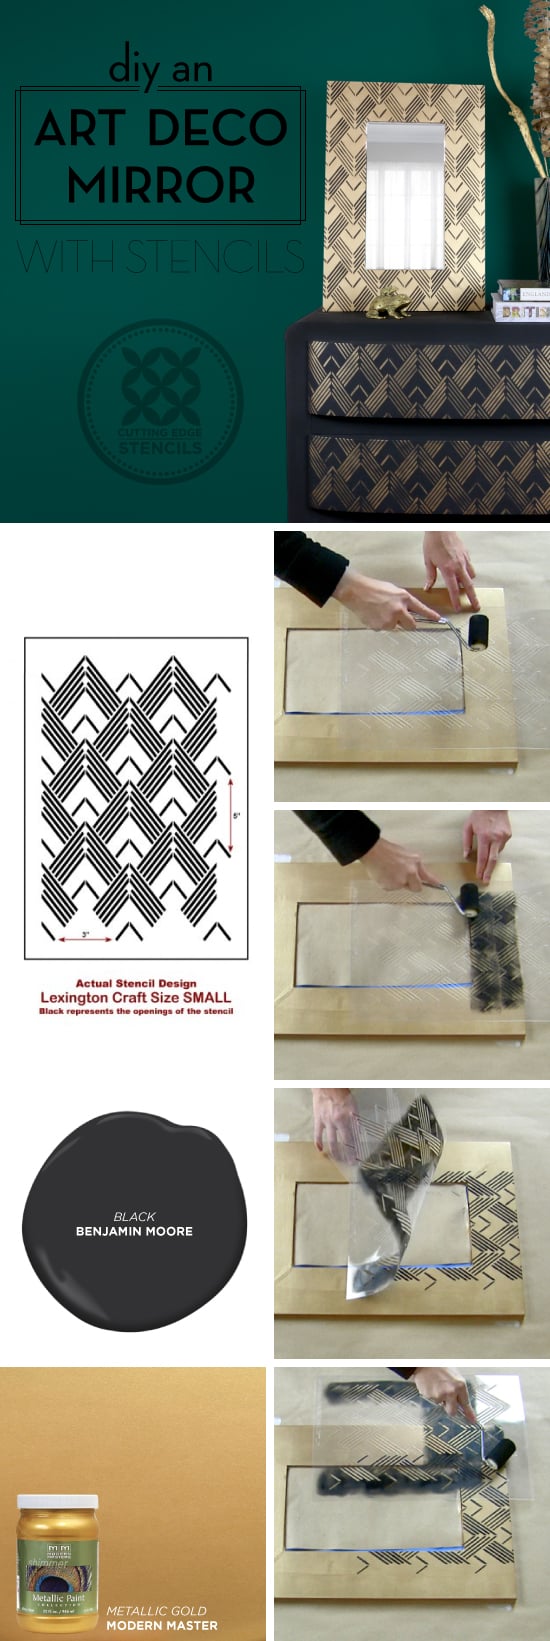 Cutting Edge Stencils shares how to put an Art Deco spin on an old mirror frame using the Lexington Craft Stencil. http://www.cuttingedgestencils.com/lexington-craft-stencil-furniture-stencils.html